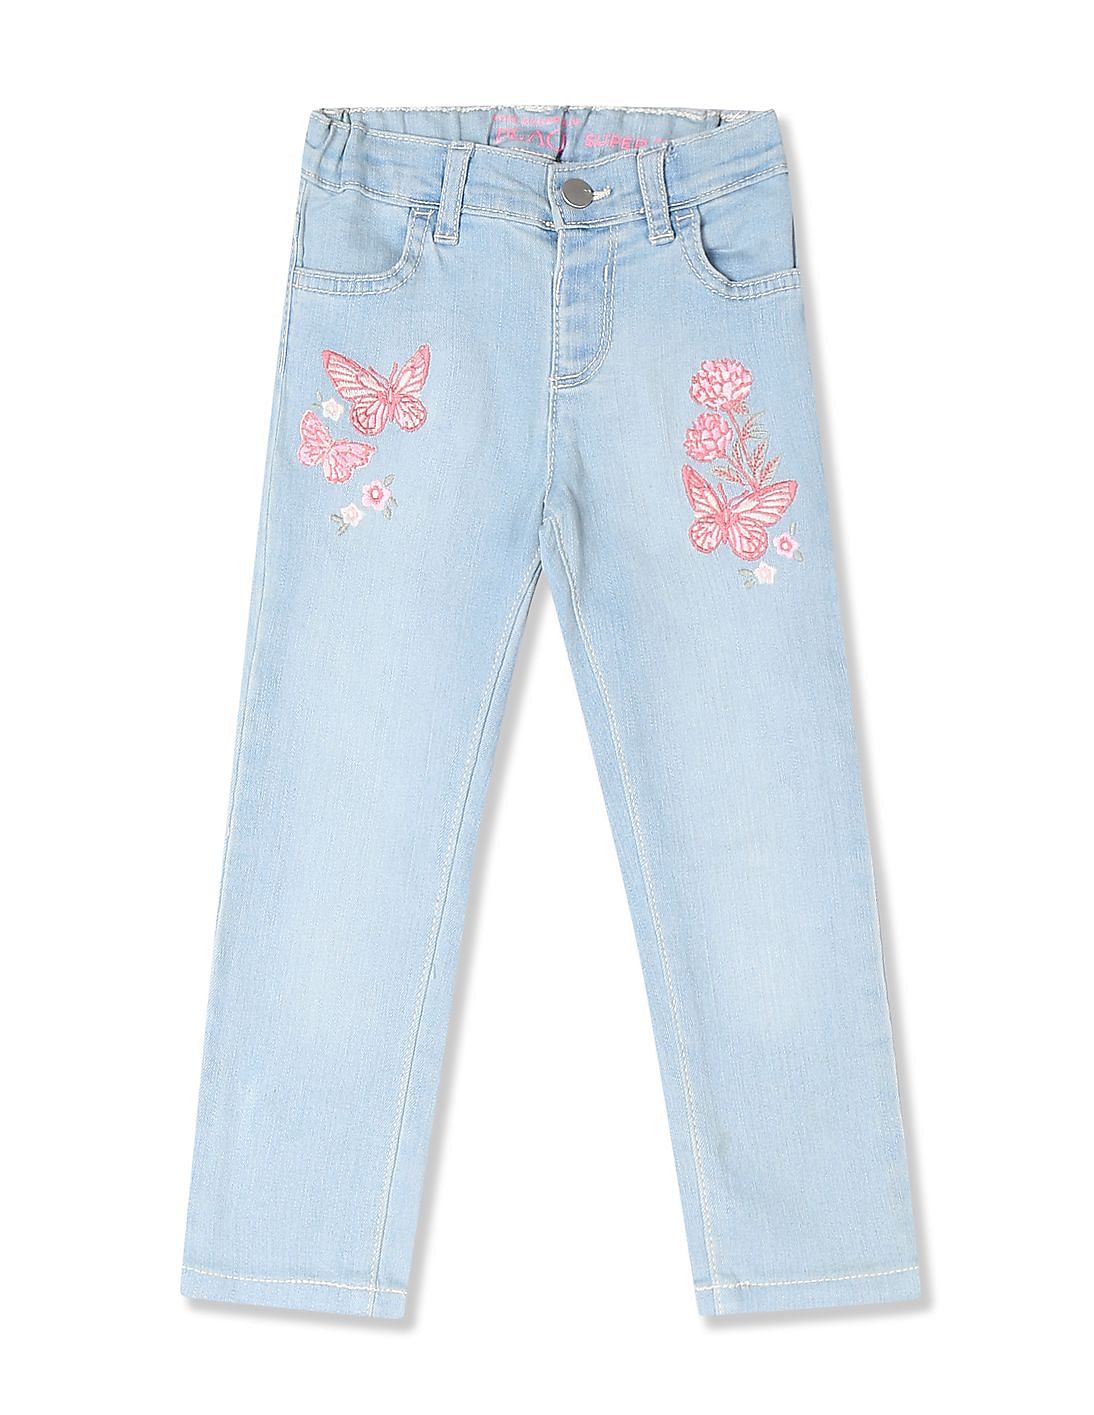 Buy The Children's Place Girls Blue Embroidered Butterfly Patch Denim ...